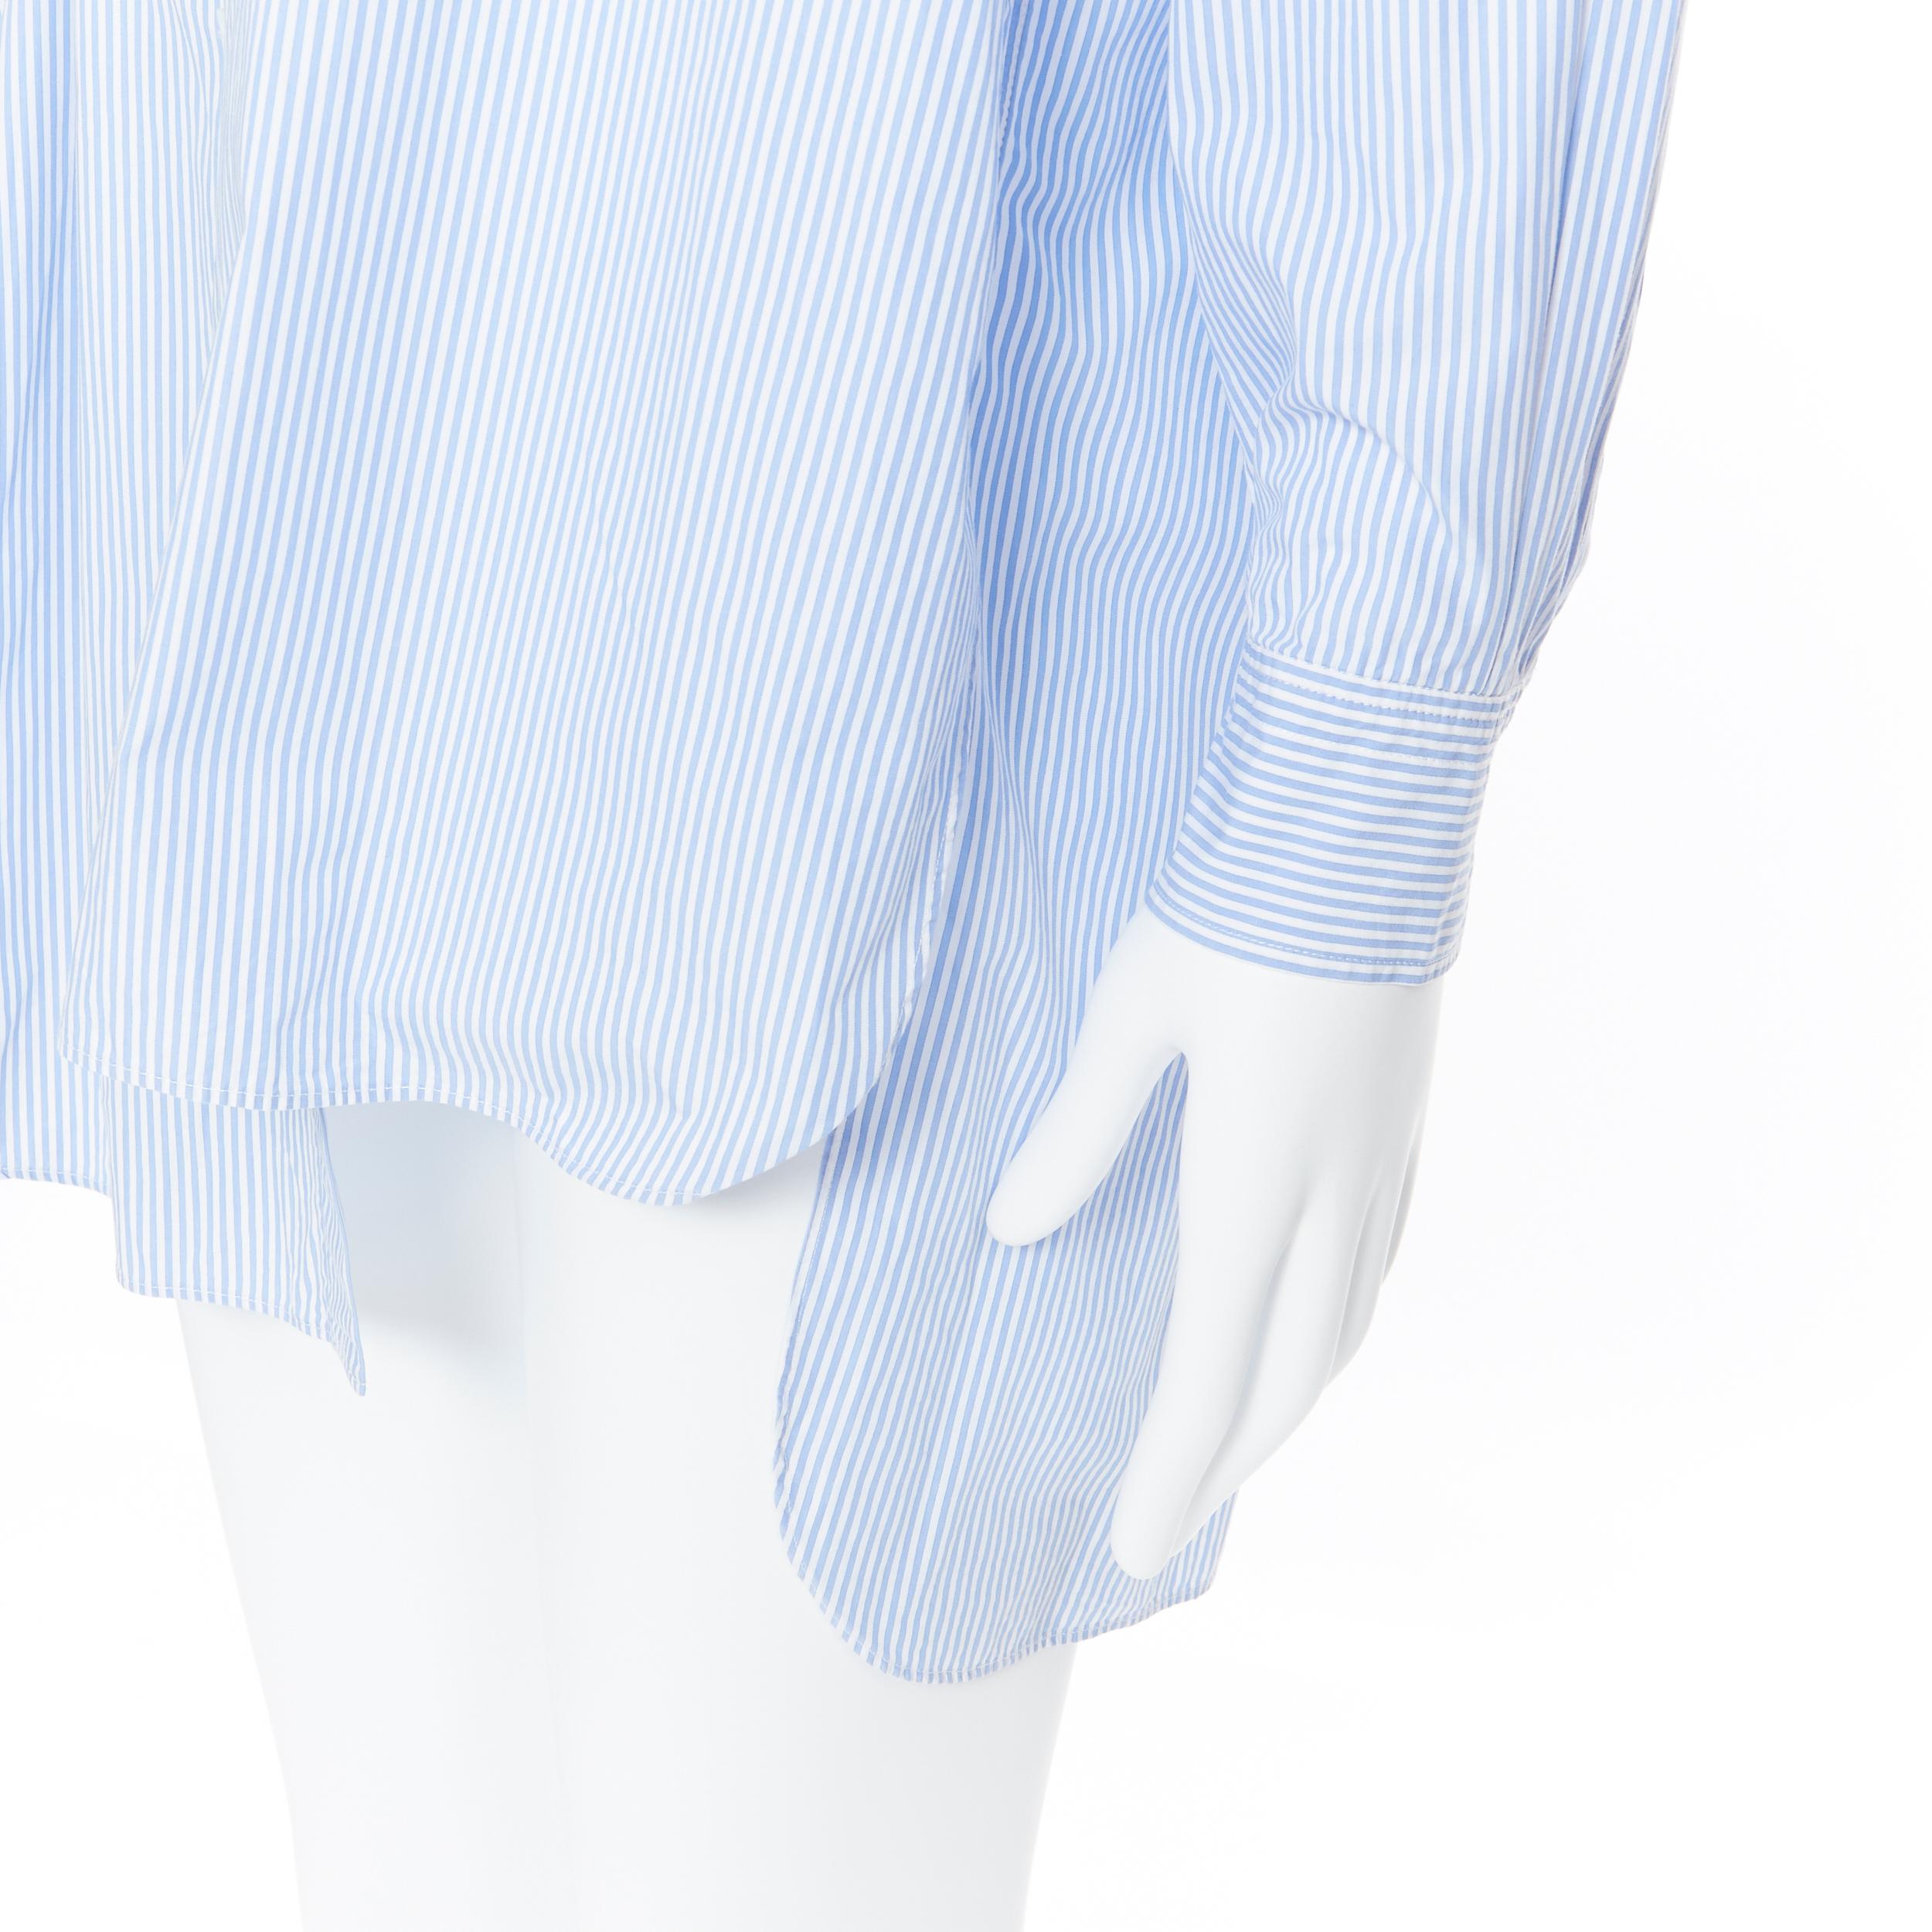 LOEWE JW ANDERSON 100% blue white striped cotton bib collar long line shirt S
Brand: Loewe
Designer: JW Anderson
Model Name / Style: Cotton shirt
Material: Cotton
Color: Blue
Pattern: Striped
Closure: Button
Extra Detail: Long sleeve.
Made in: